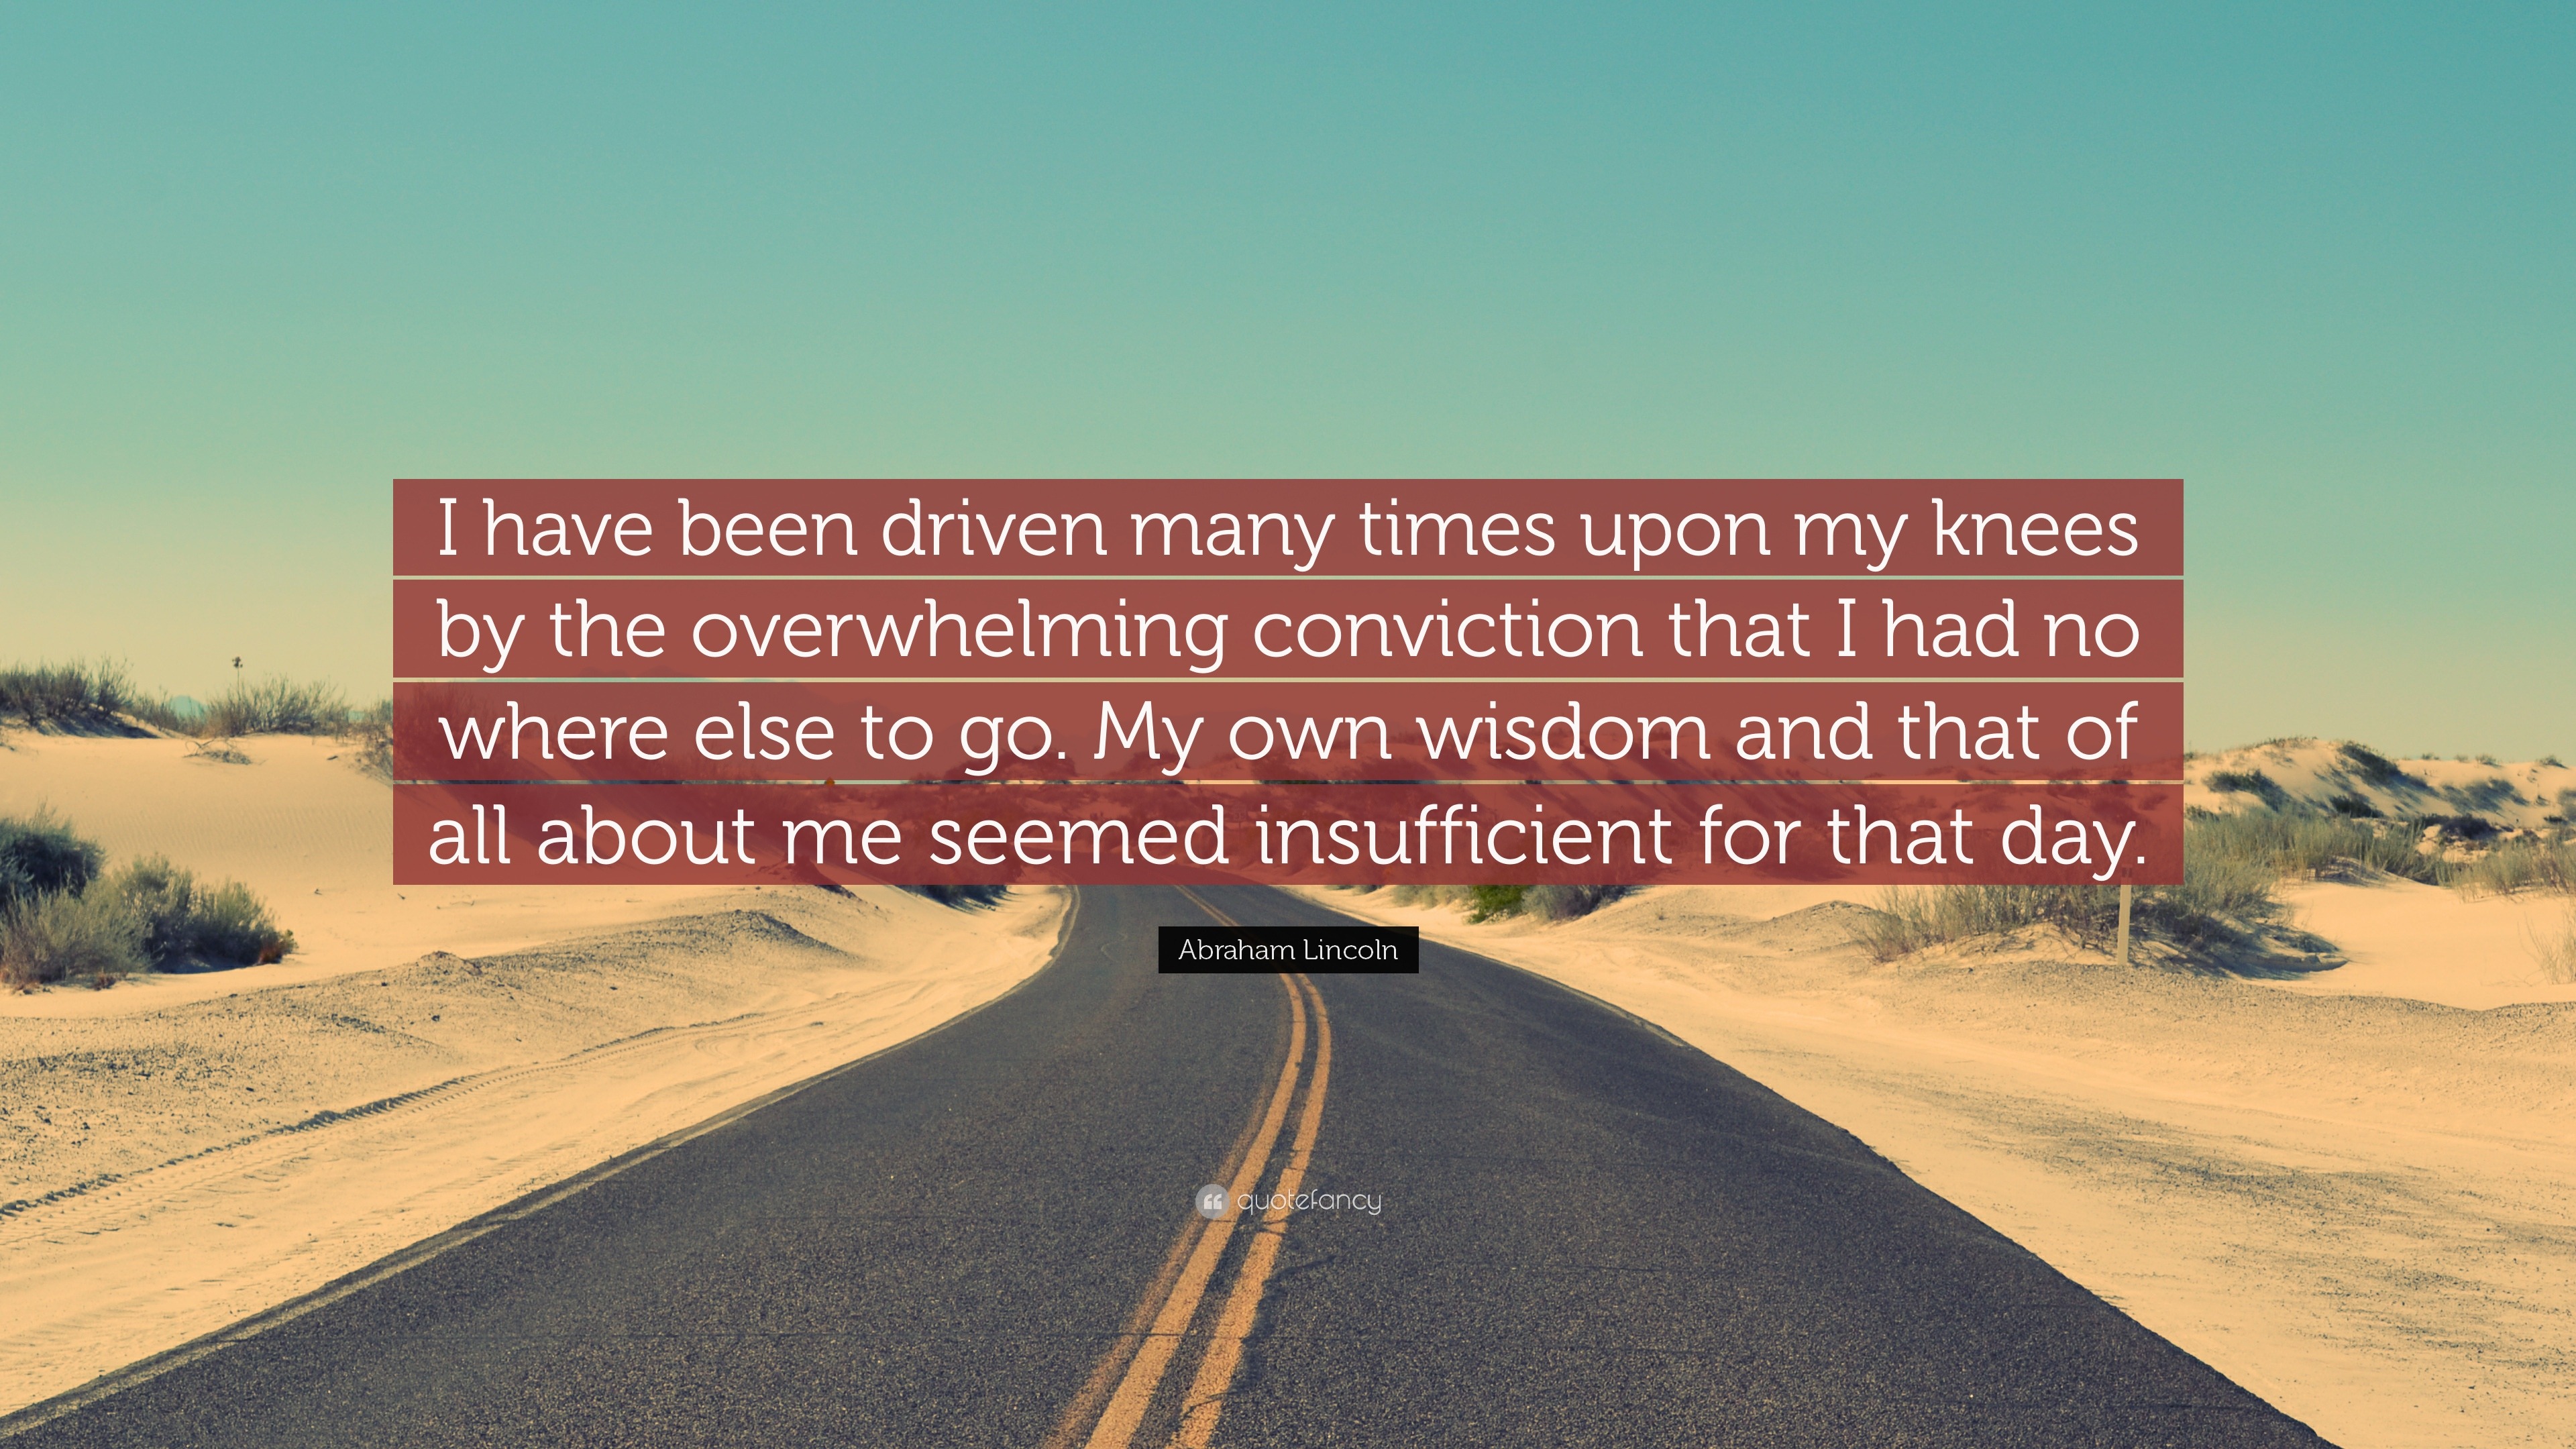 Abraham Lincoln Quote: “I have been driven many times upon my knees by